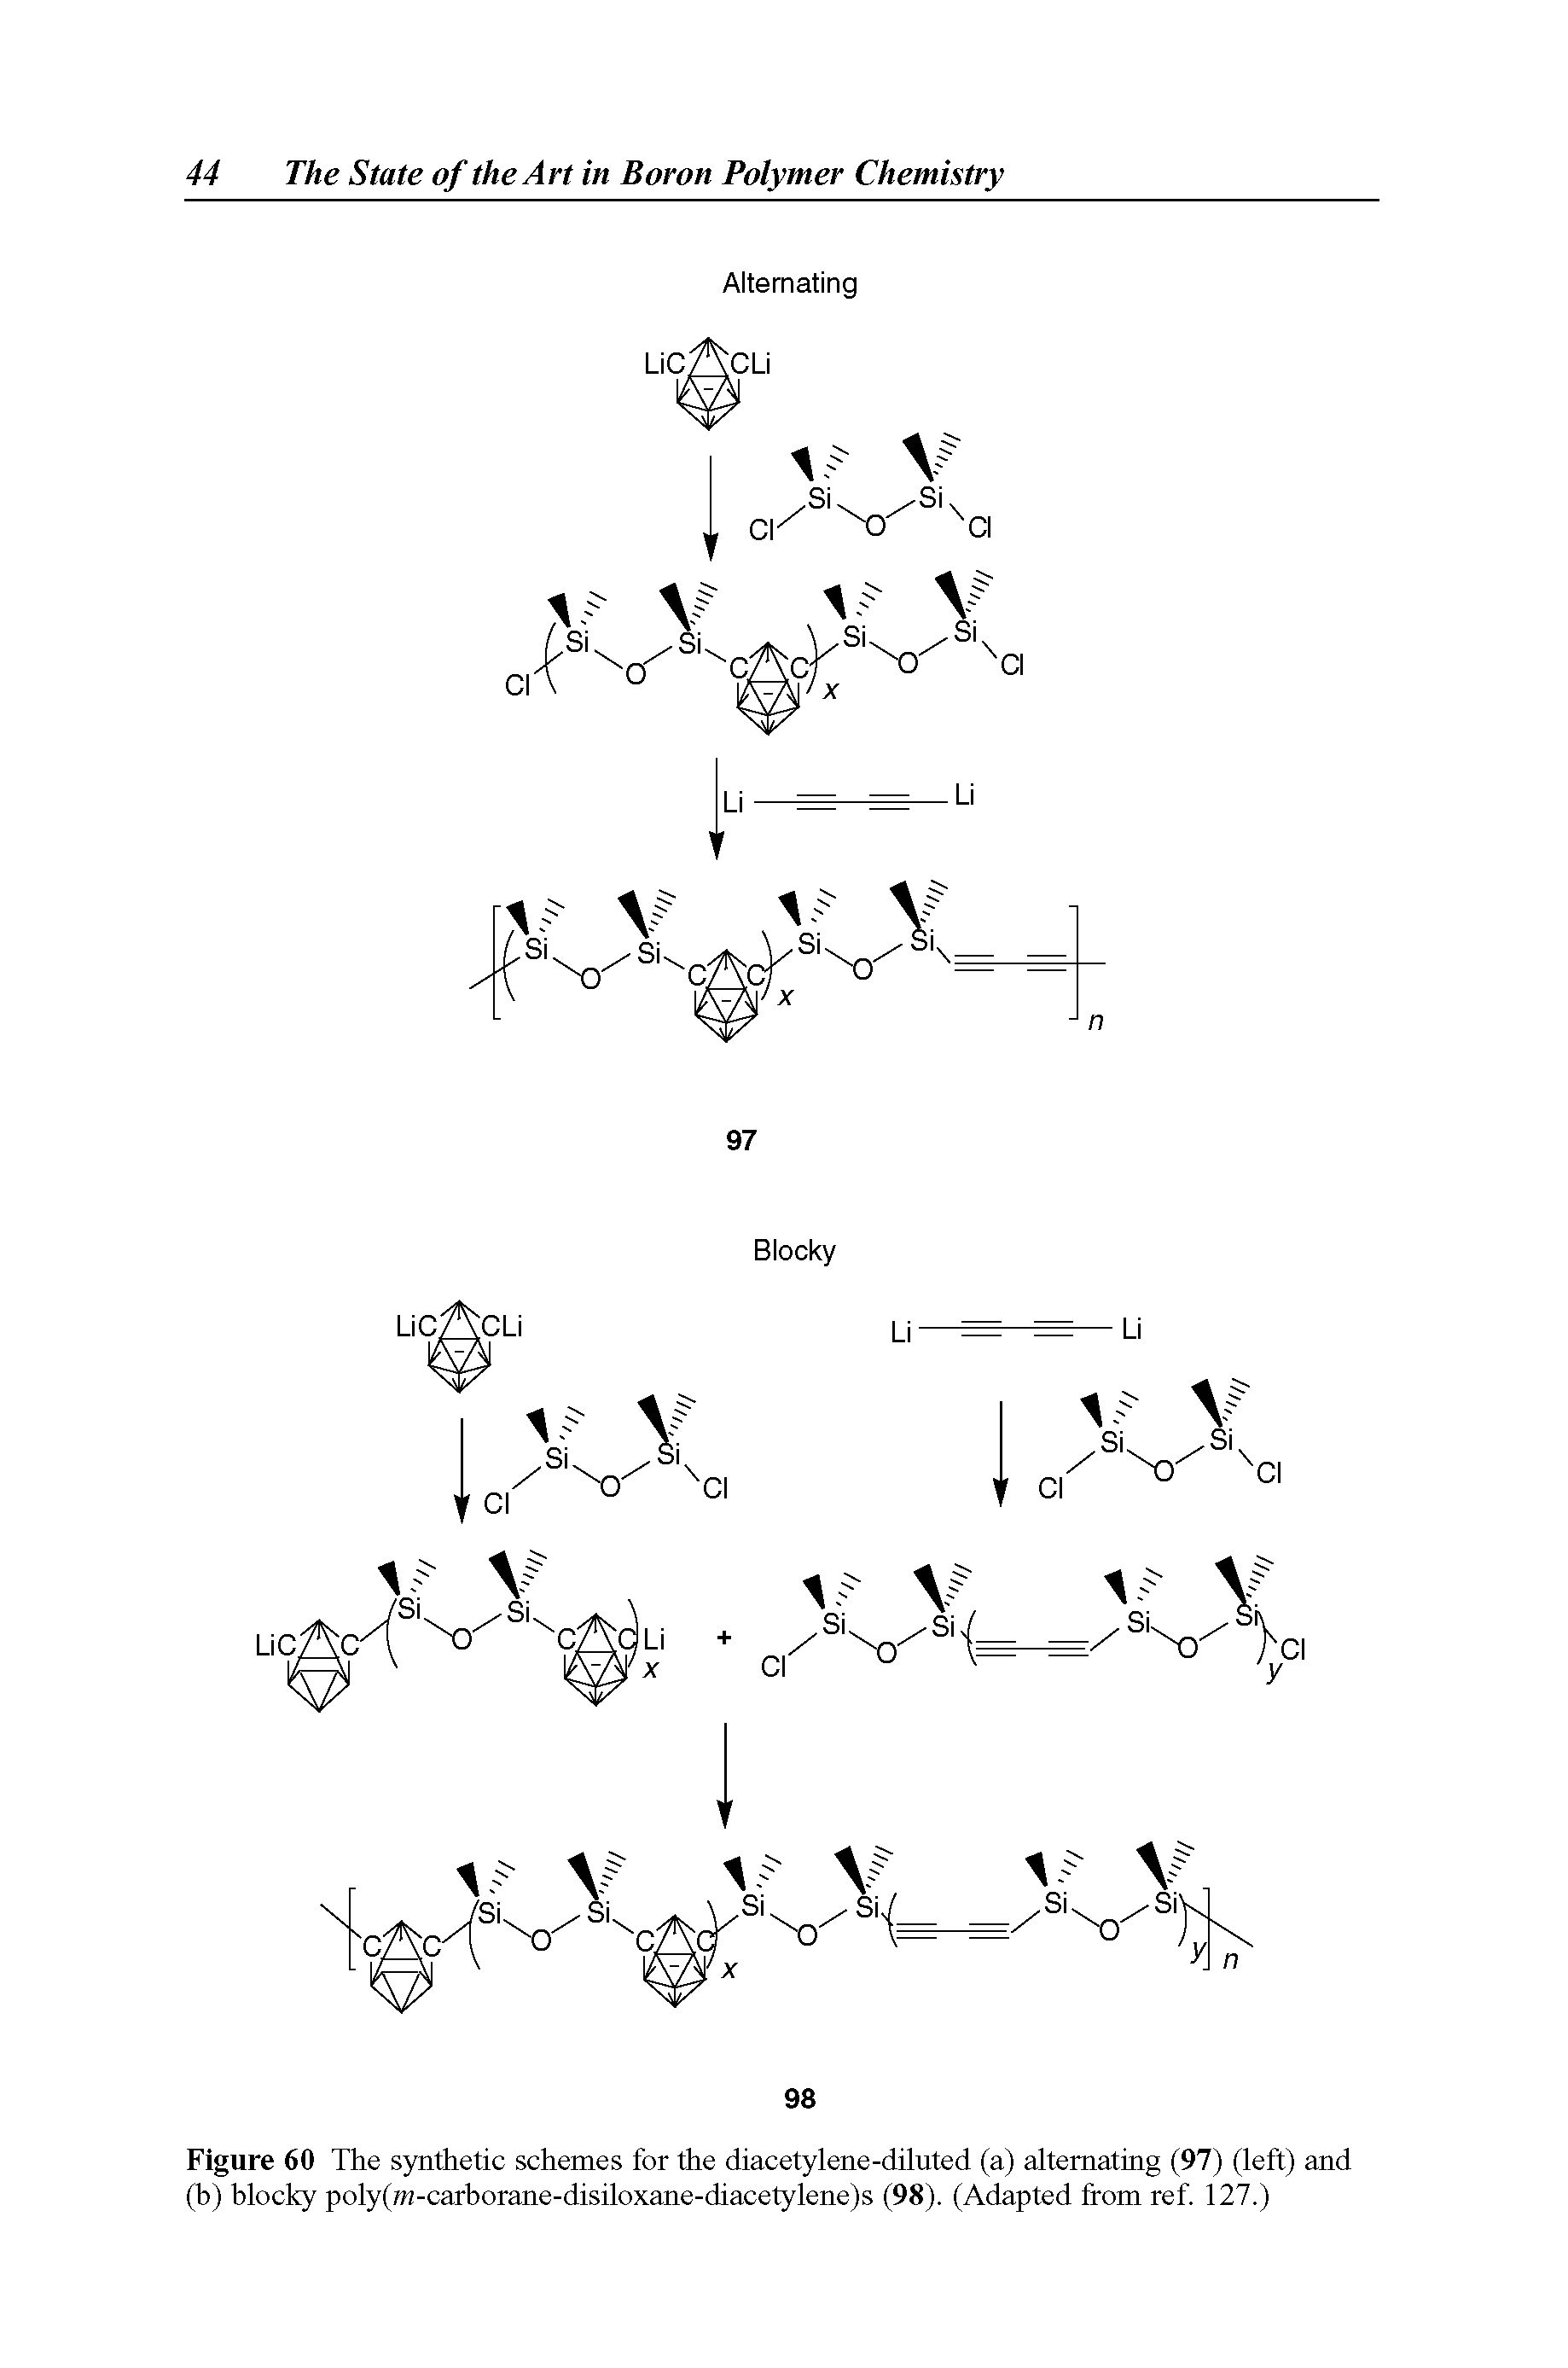 Figure 60 The synthetic schemes for the diacetylene-diluted (a) alternating (97) (left) and (b) blocky poly( -carborane-disiloxane-diacetylene)s (98). (Adapted from ref. 127.)...